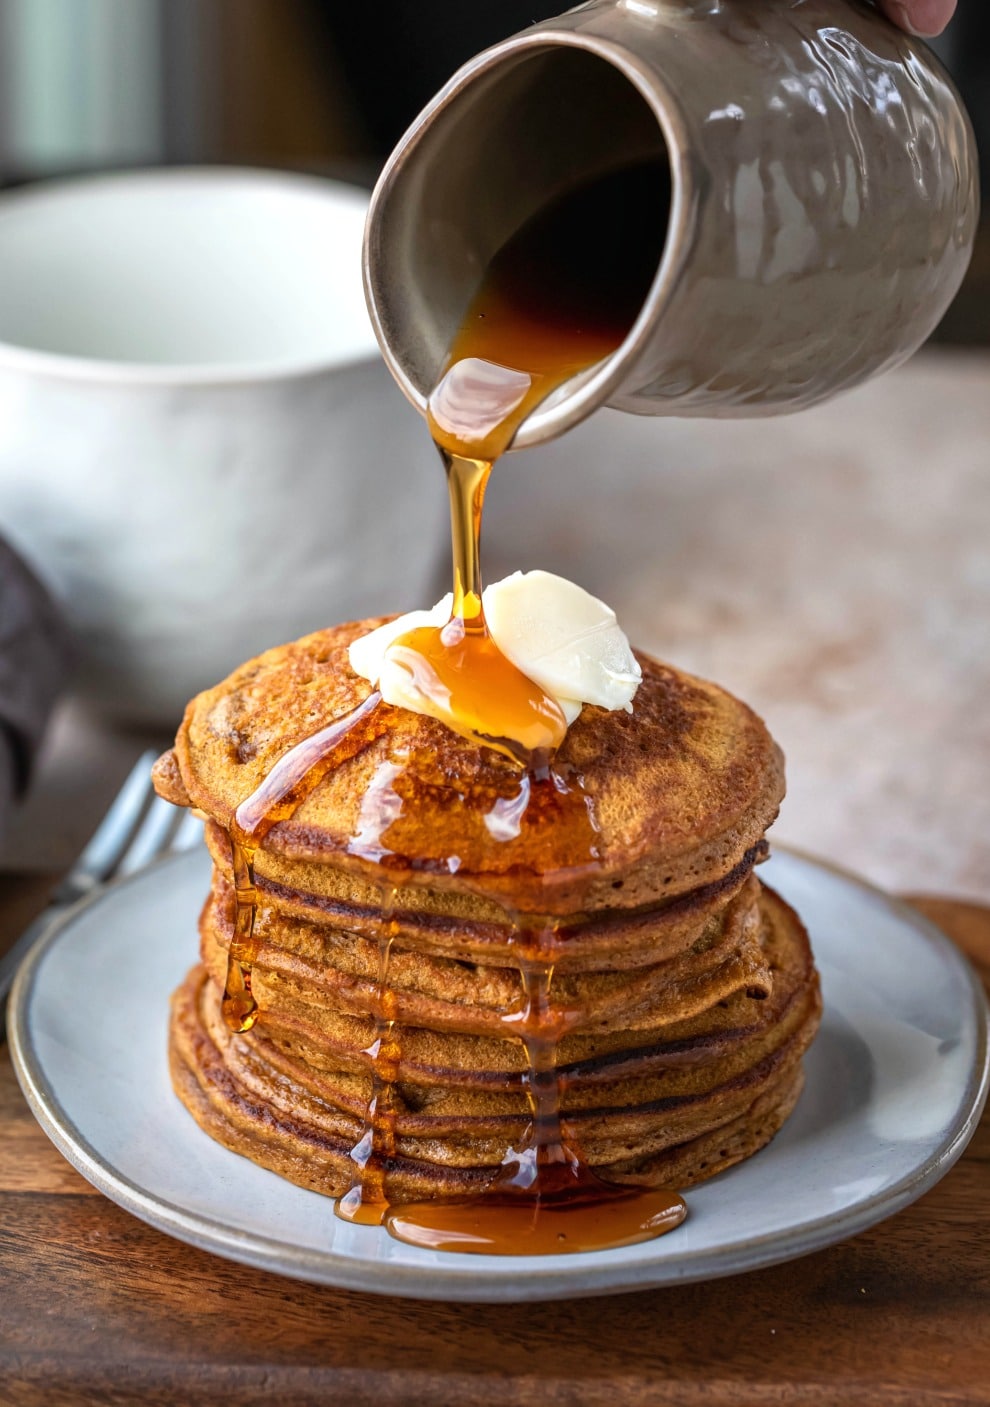 Syrup pouring onto a stack of gingerbread pancakes